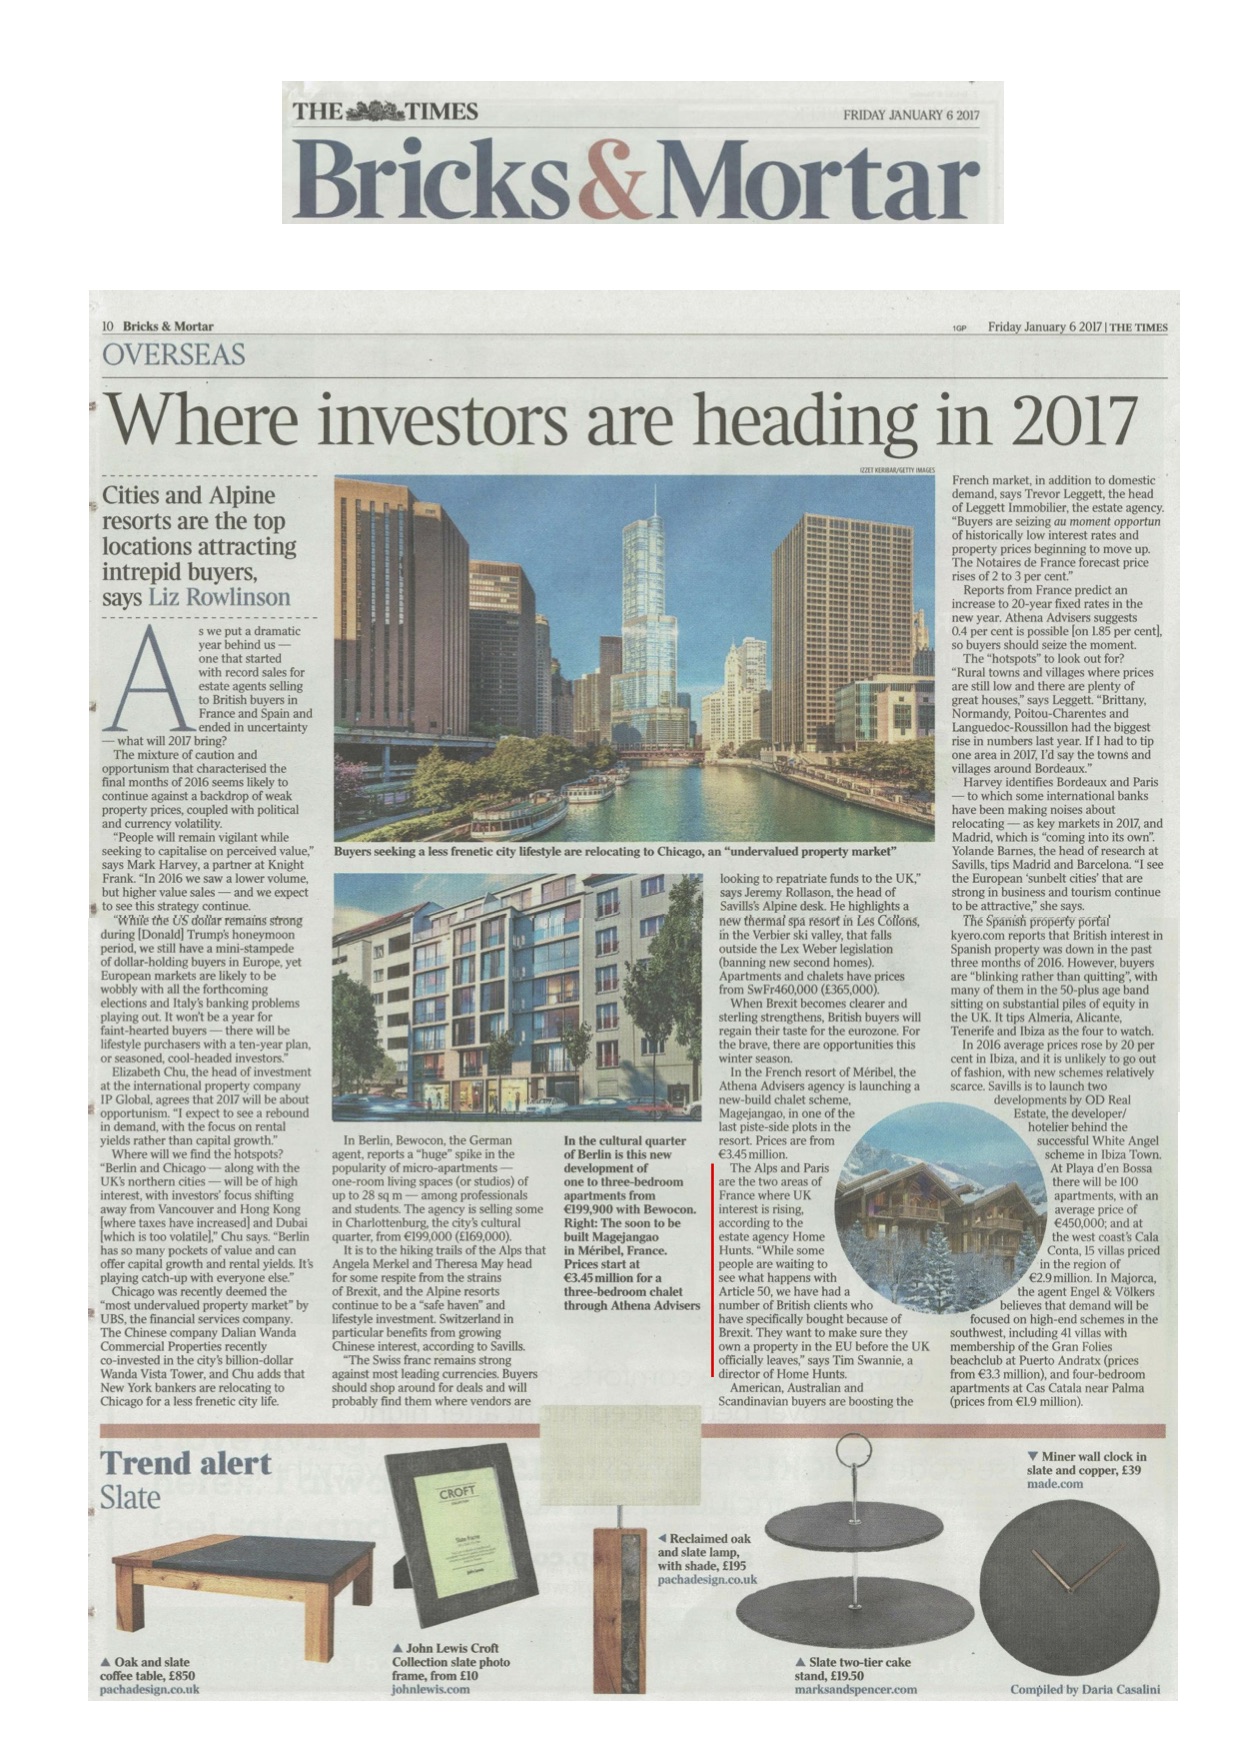 The Times – Where are investors buying property in 2017